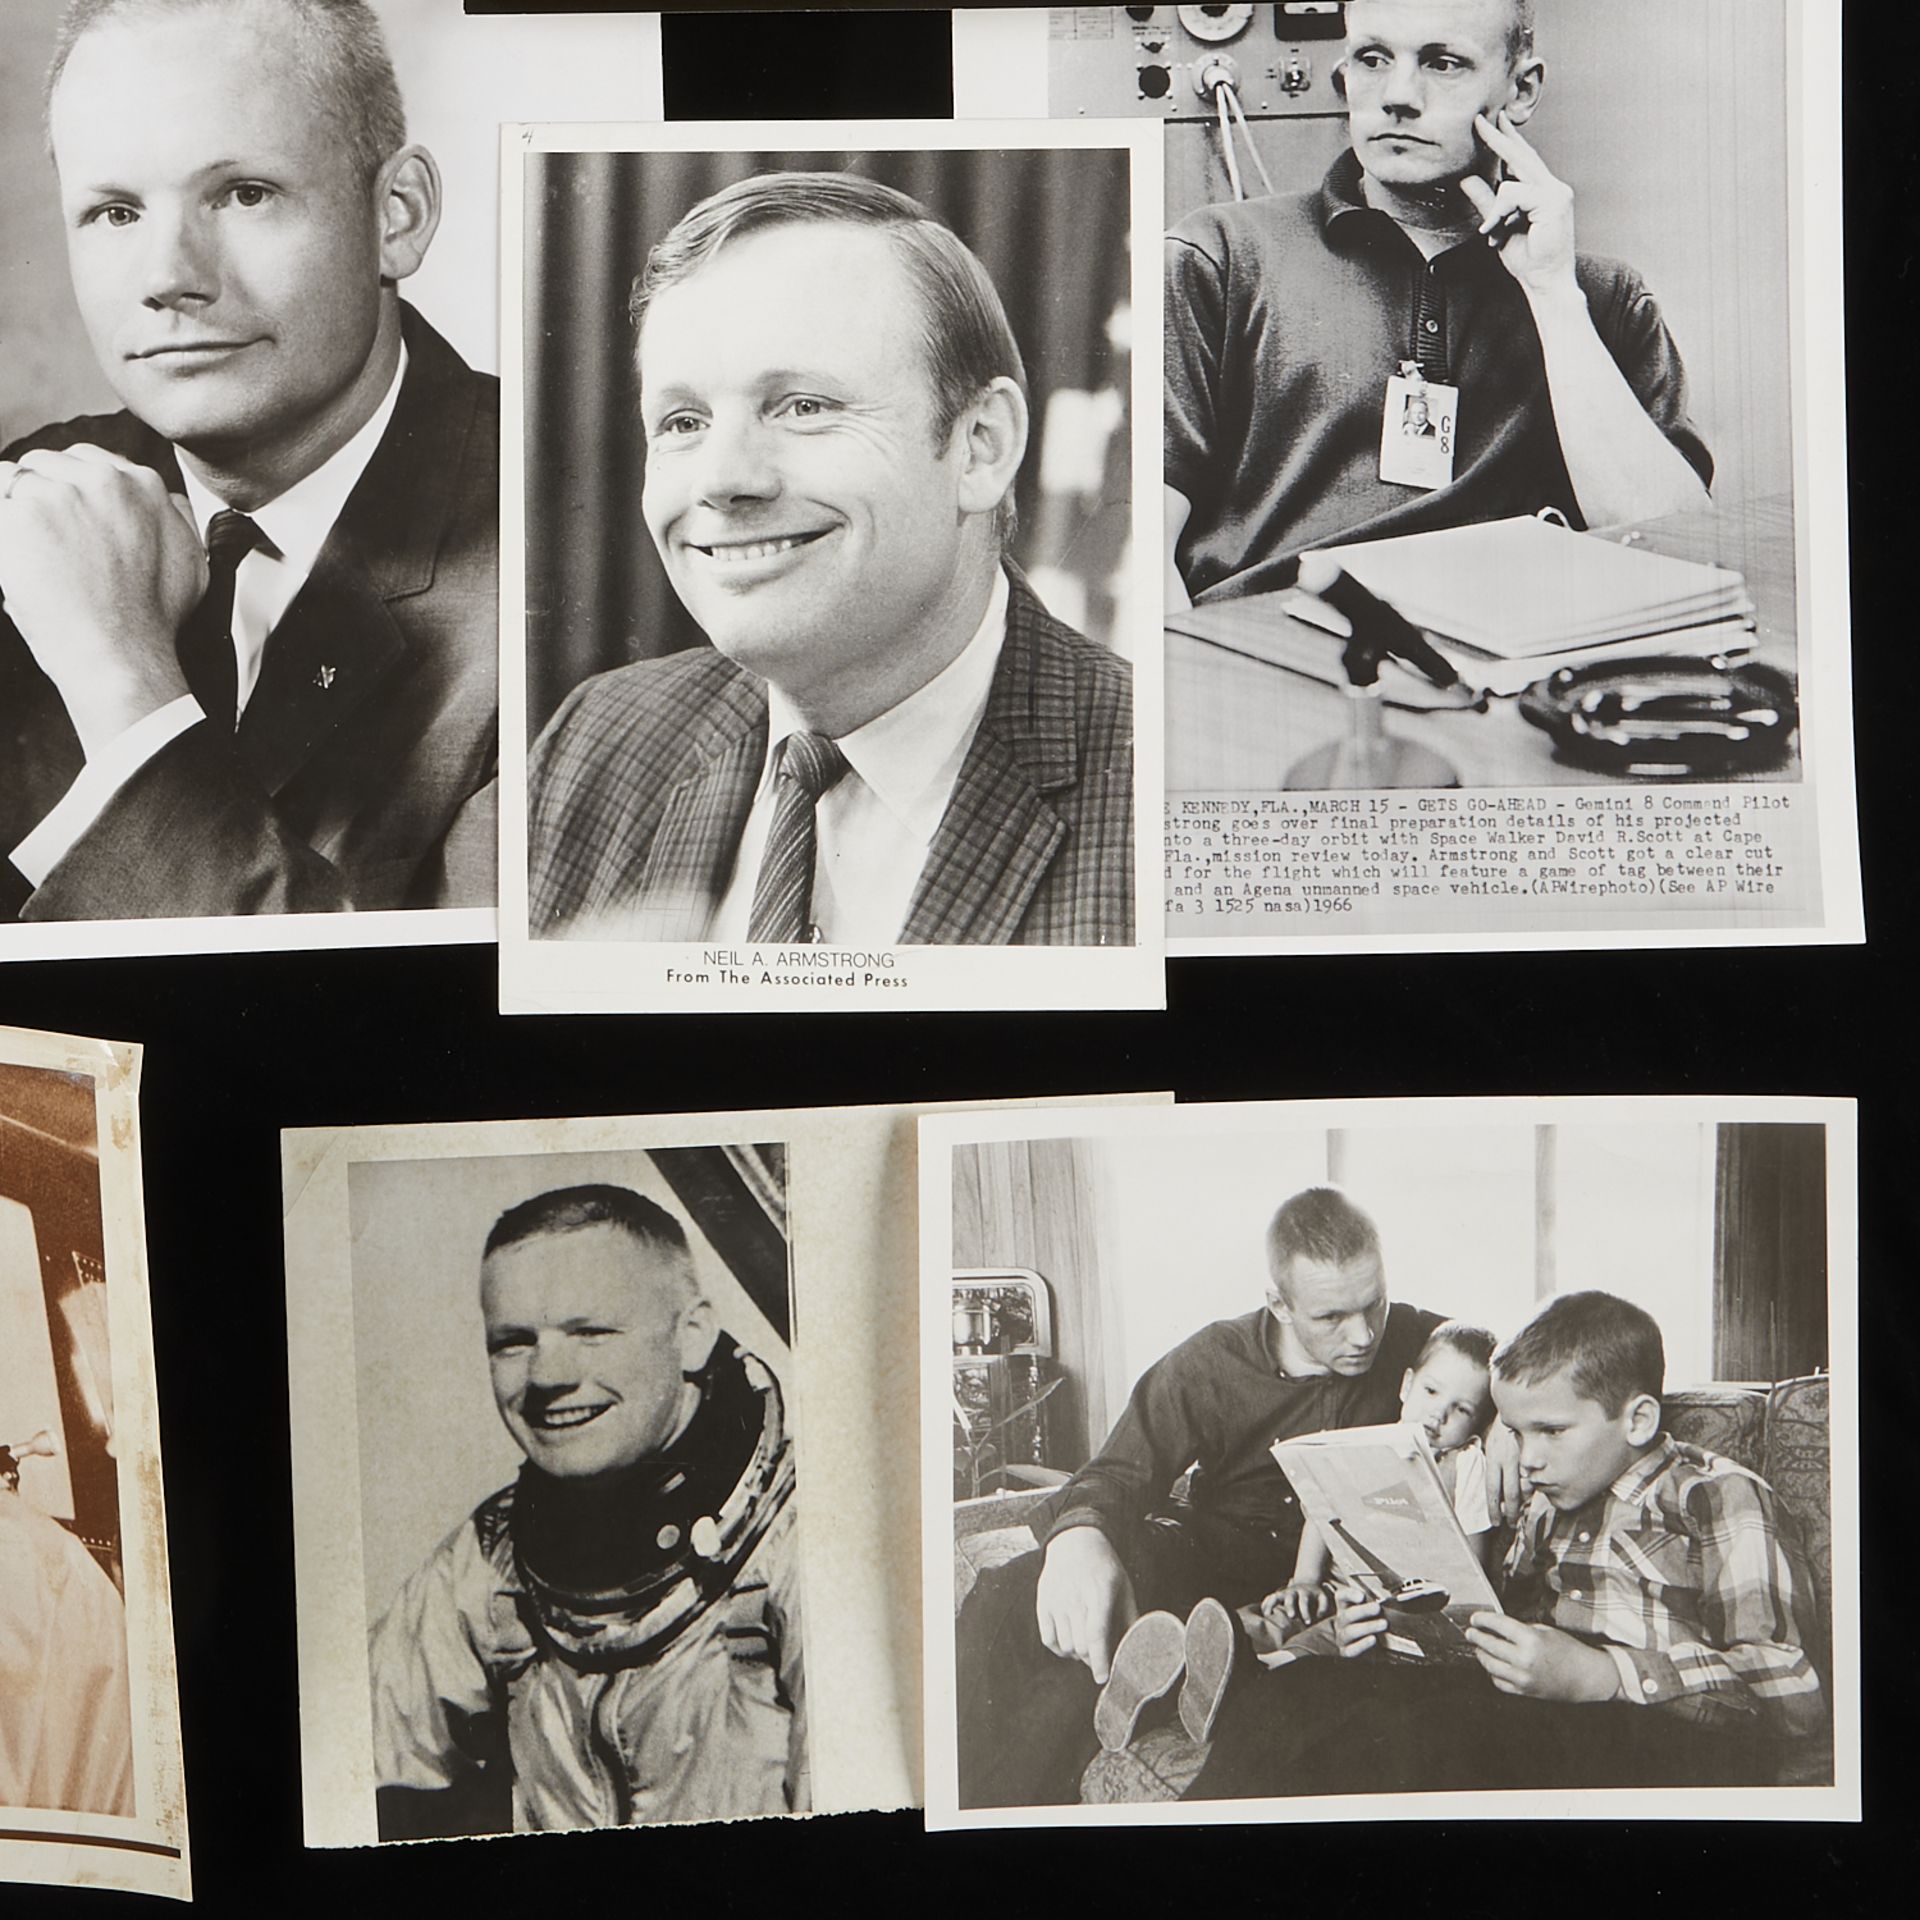 13 Neil Armstrong Photos from Star Tribune - Image 5 of 10